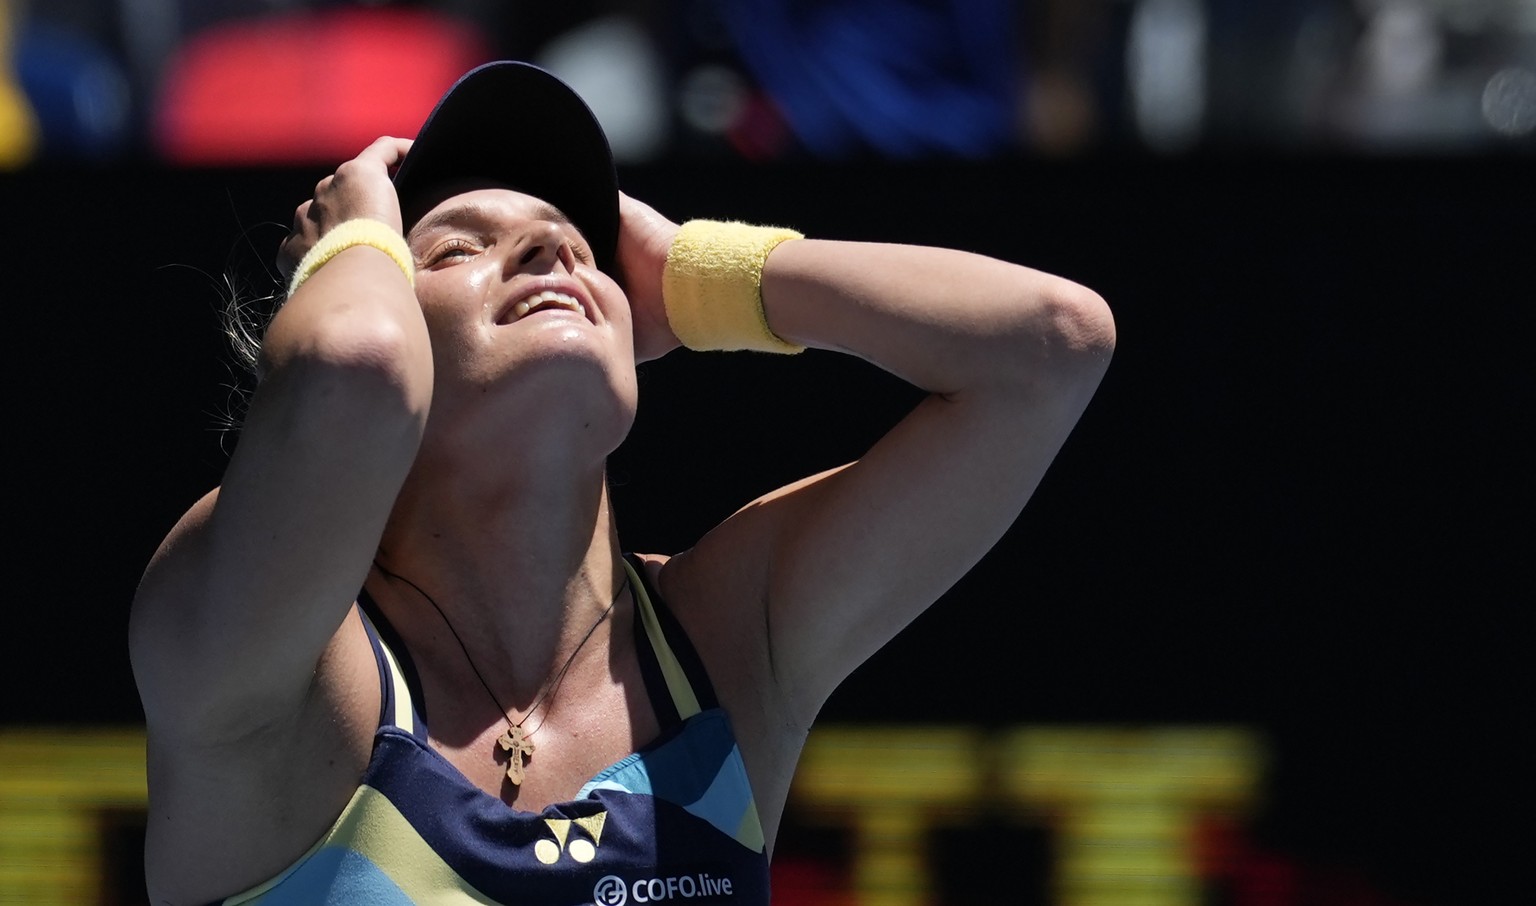 Dayana Yastremska of Ukraine celebrates after defeating Linda Noskova of the Czech Republic in their quarterfinal match at the Australian Open tennis championships at Melbourne Park, Melbourne, Austra ...